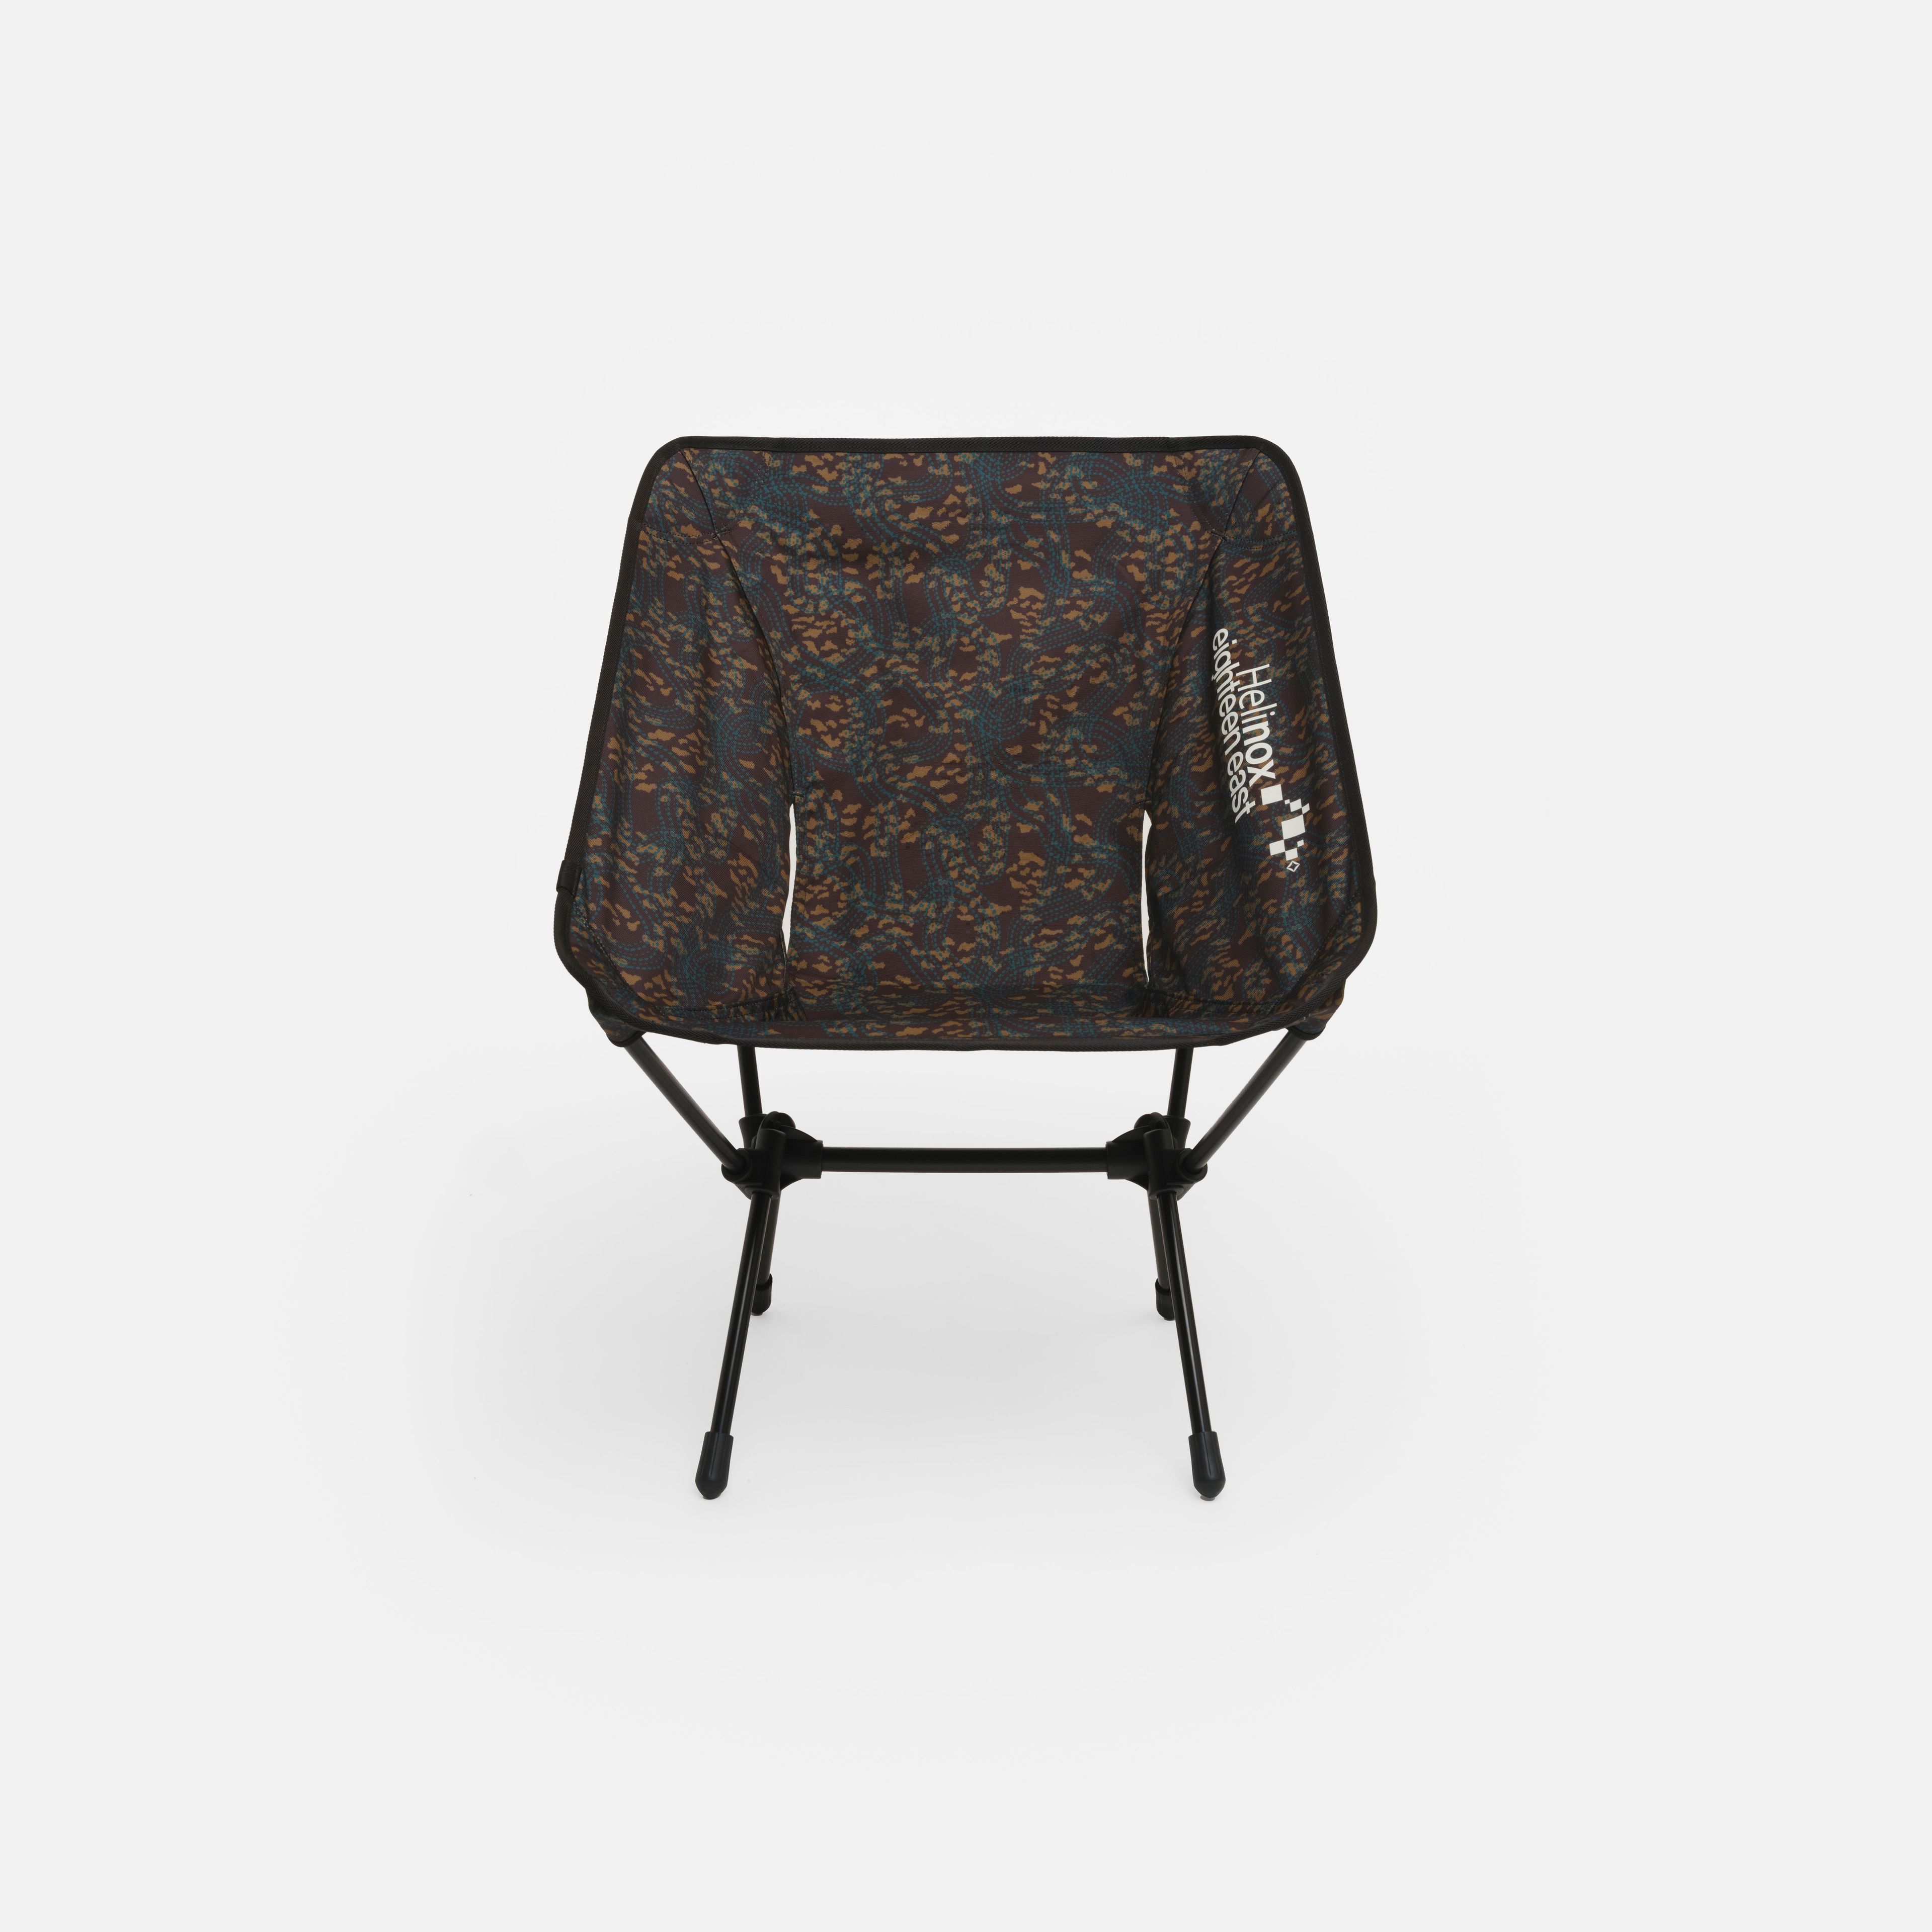 Helinox Tactical Chair One - Obsidian "Tracks" Printed 600d Recycled Polyester Canvas